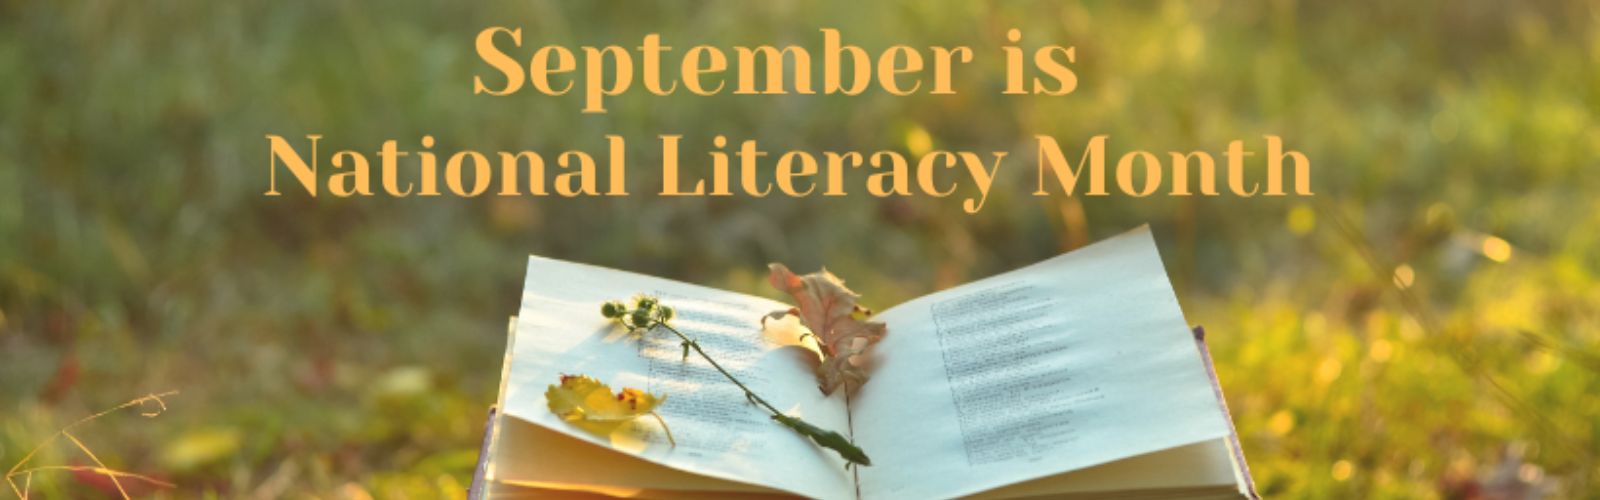 September is National Literacy Month